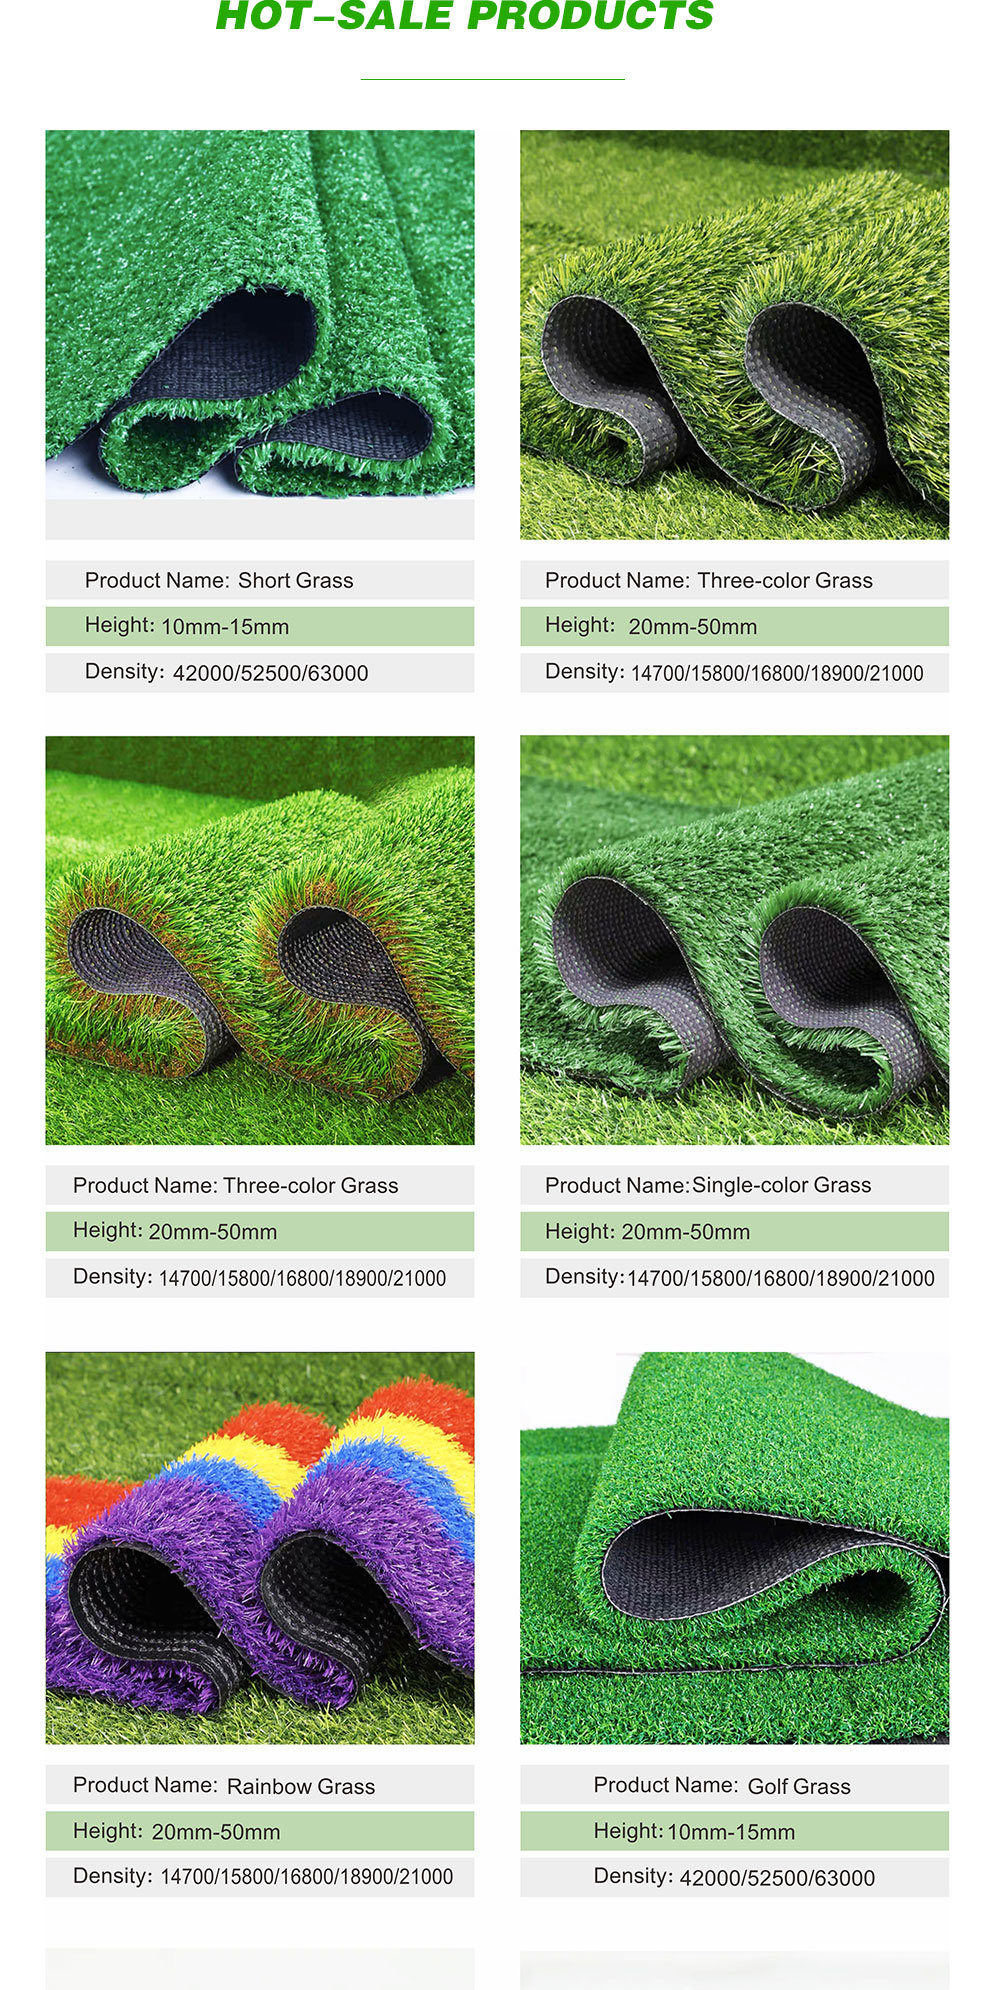 35mm Green Artifical Grass Landscaping Depuy Synthes Anspach Synthetic Grass